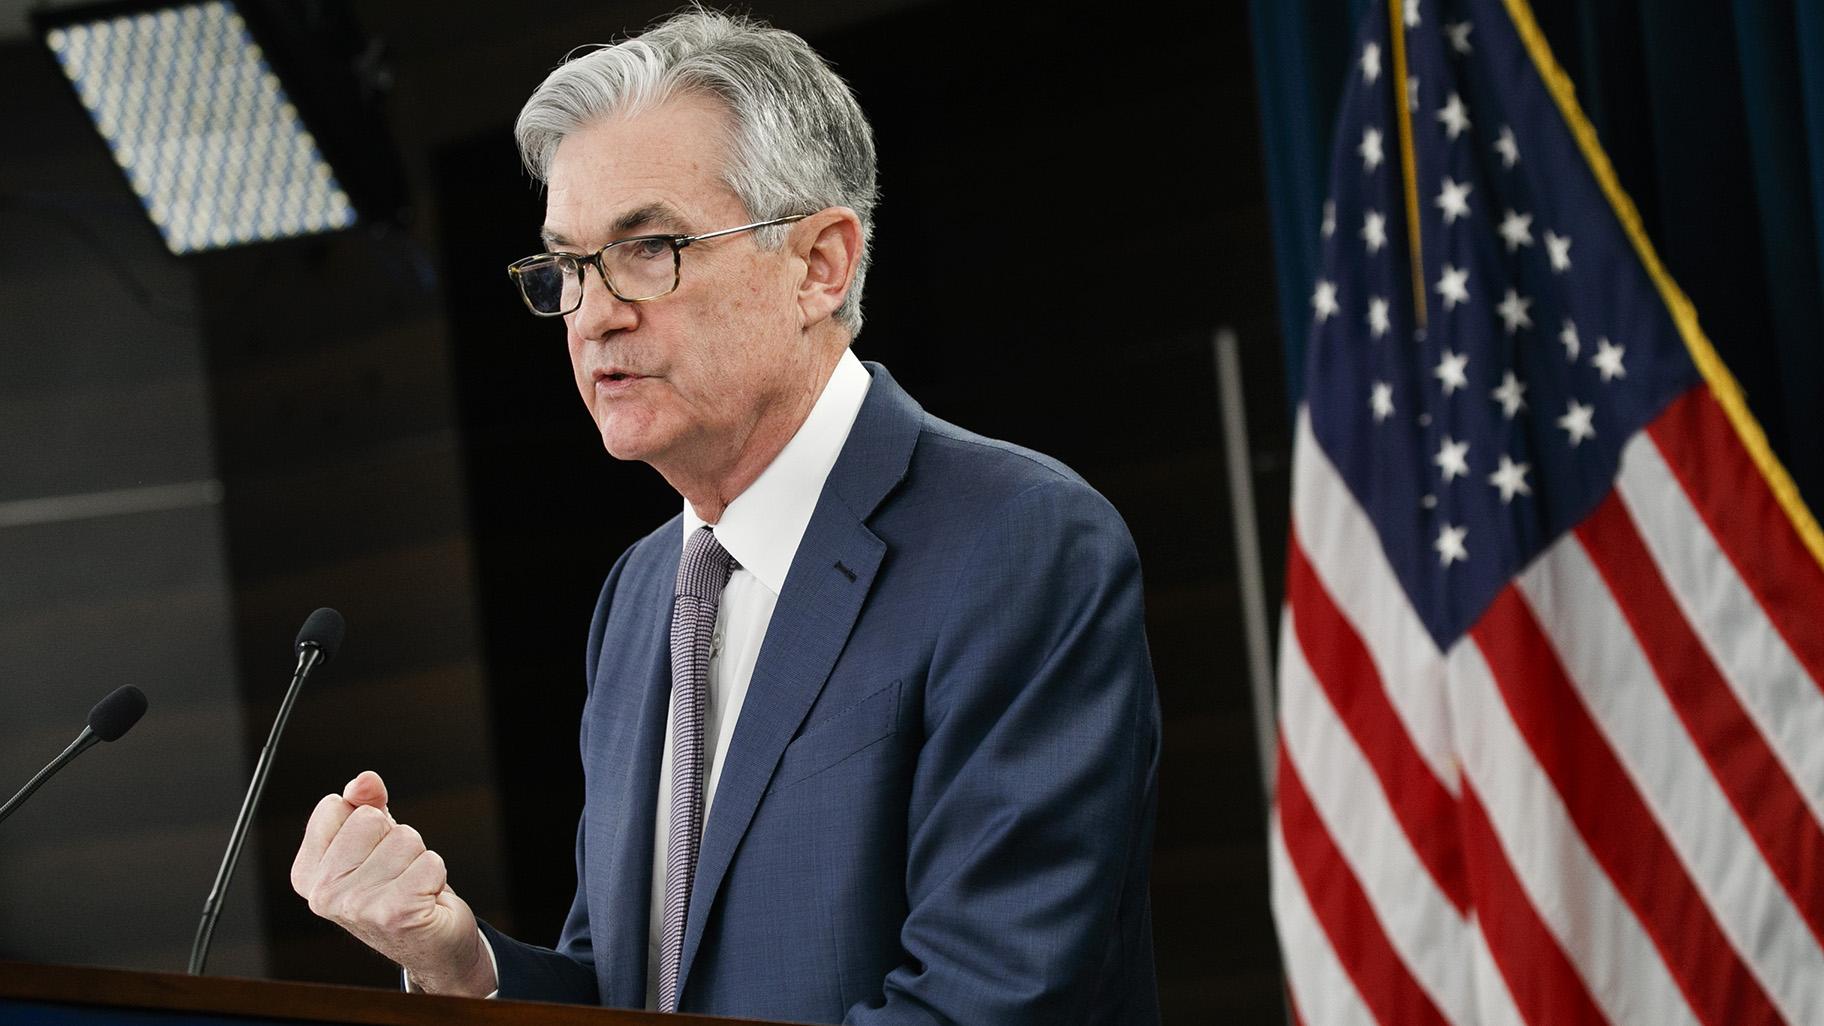 In this March 3, 2020 file photo, Federal Reserve Chair Jerome Powell speaks during a news conference in Washington. (AP Photo / Jacquelyn Martin, file)